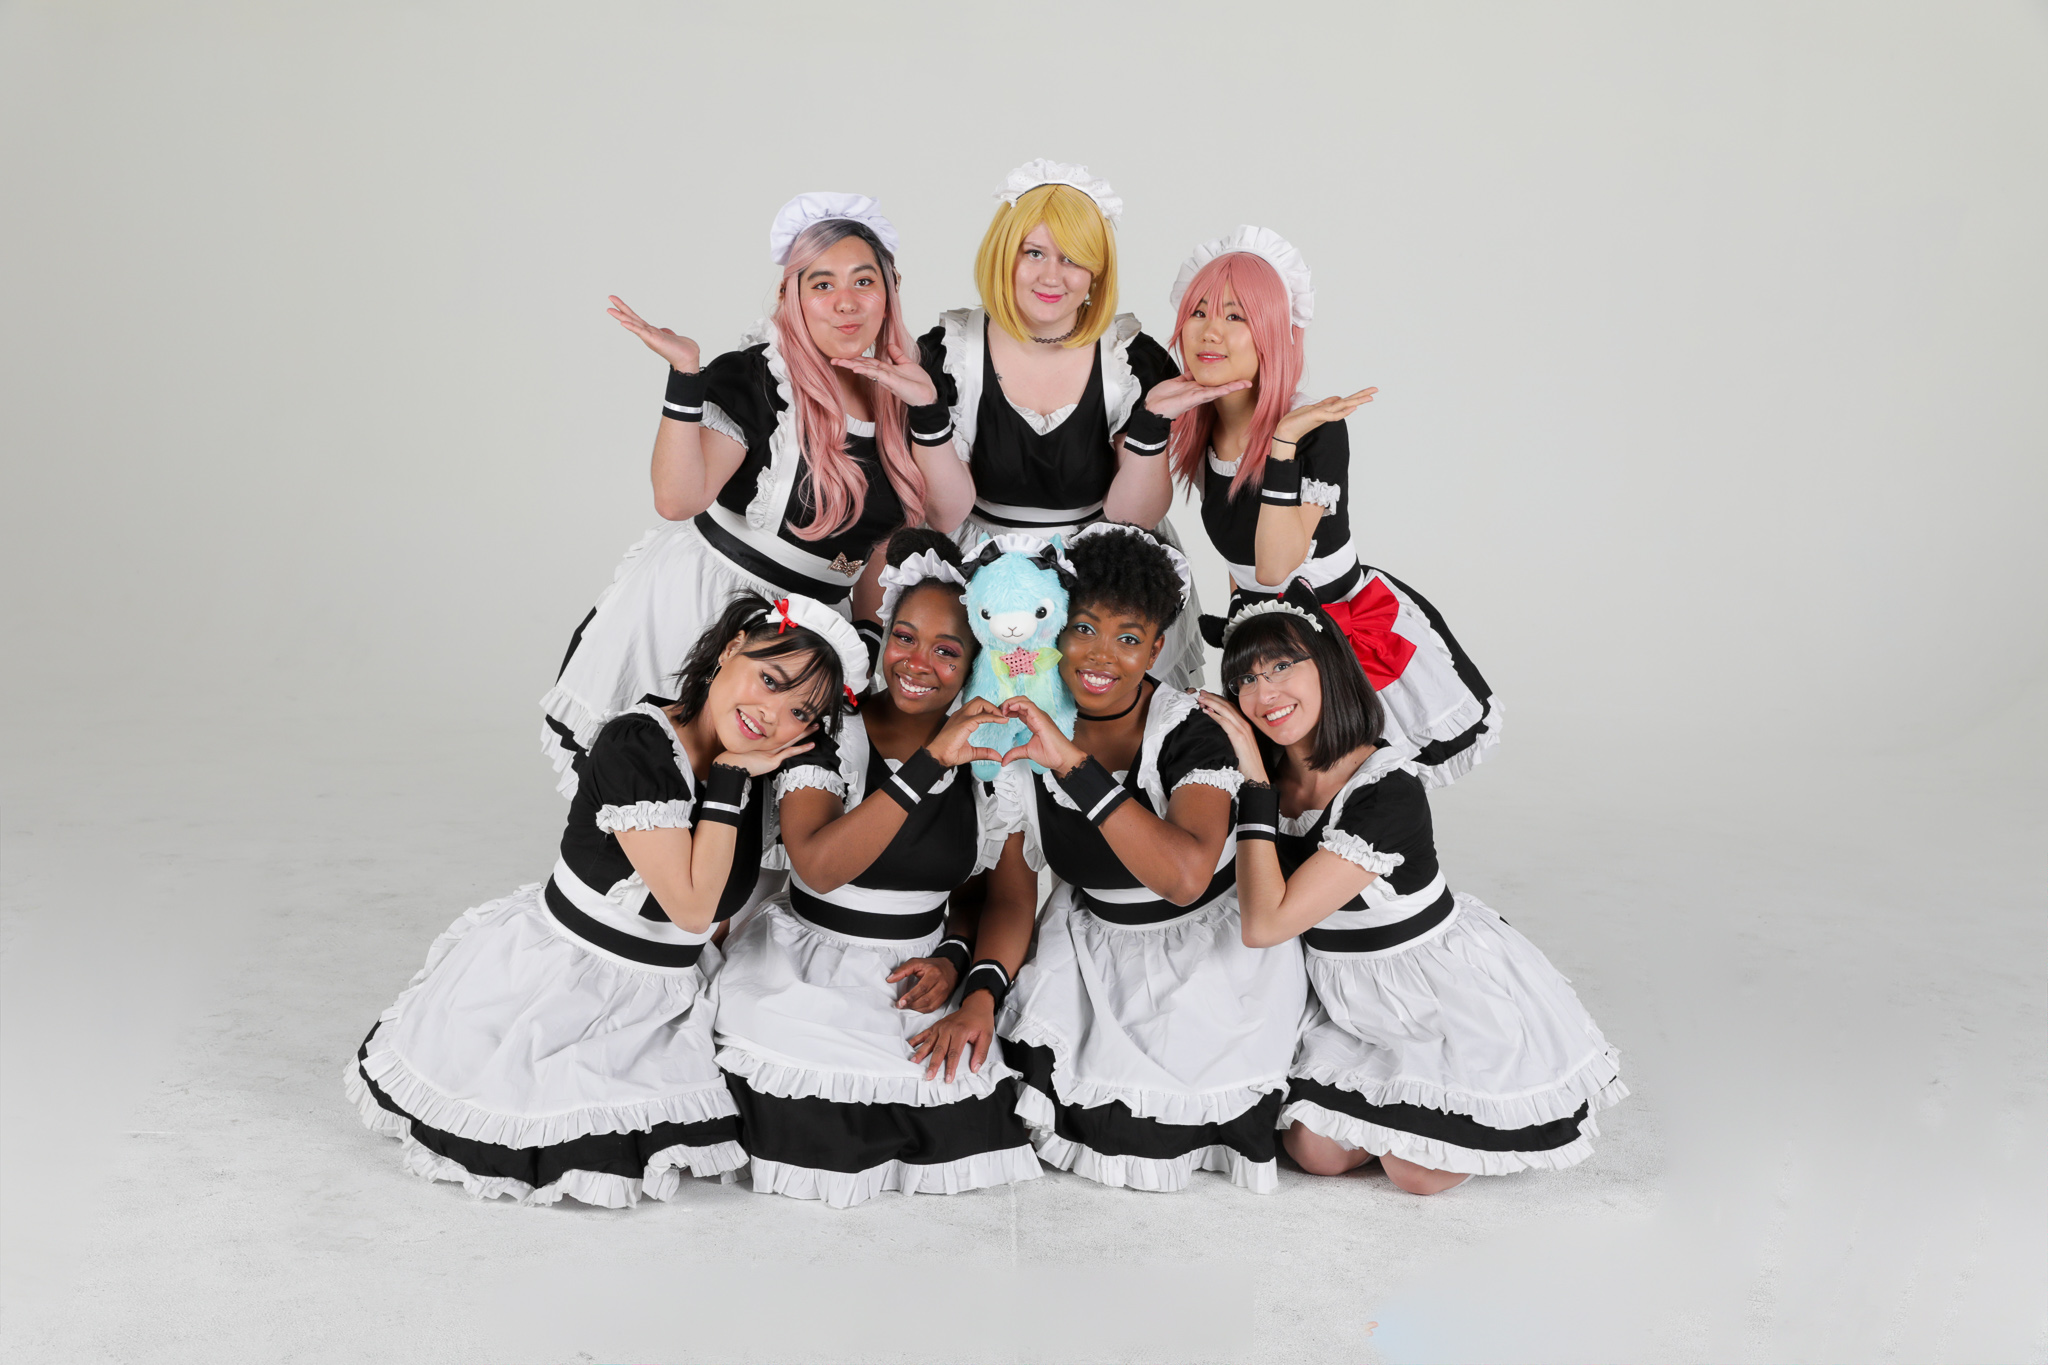 The AX Maid Cafe and AX Butler Cafe are now accepting applications for Anim...